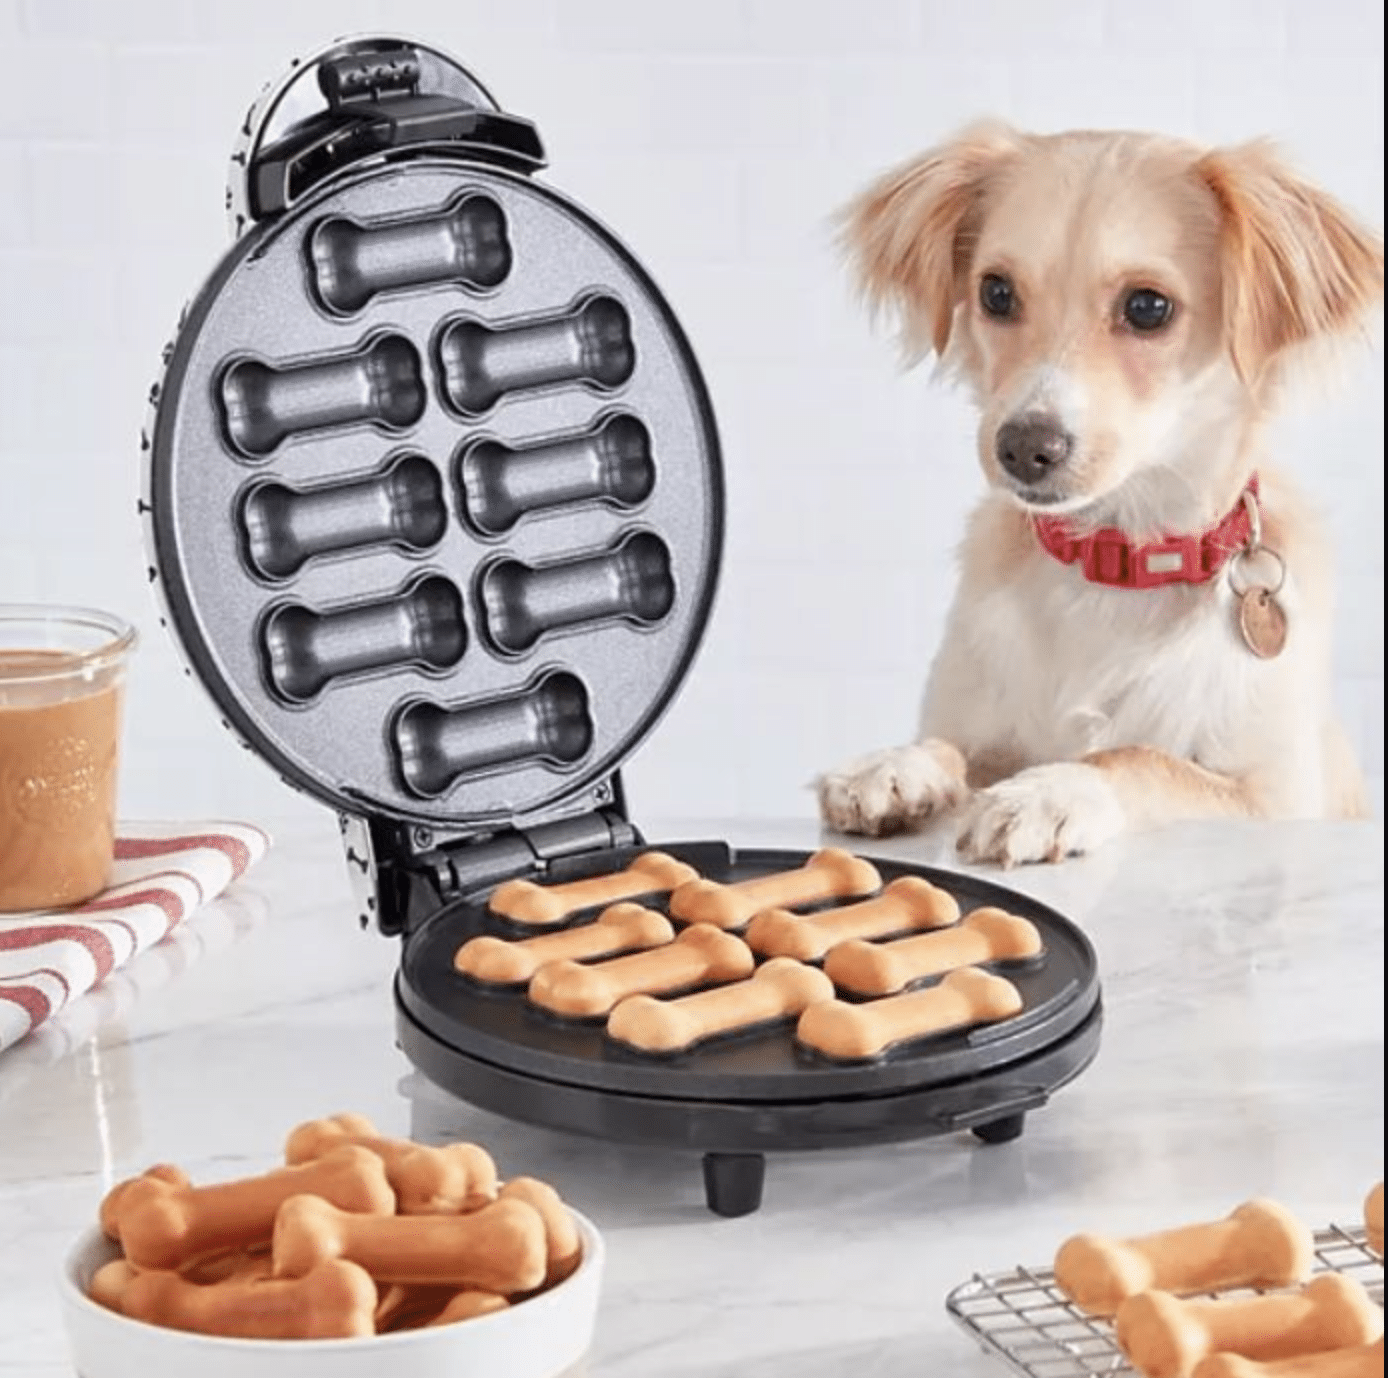 Dash Dog Treats Biscuit Maker with dog